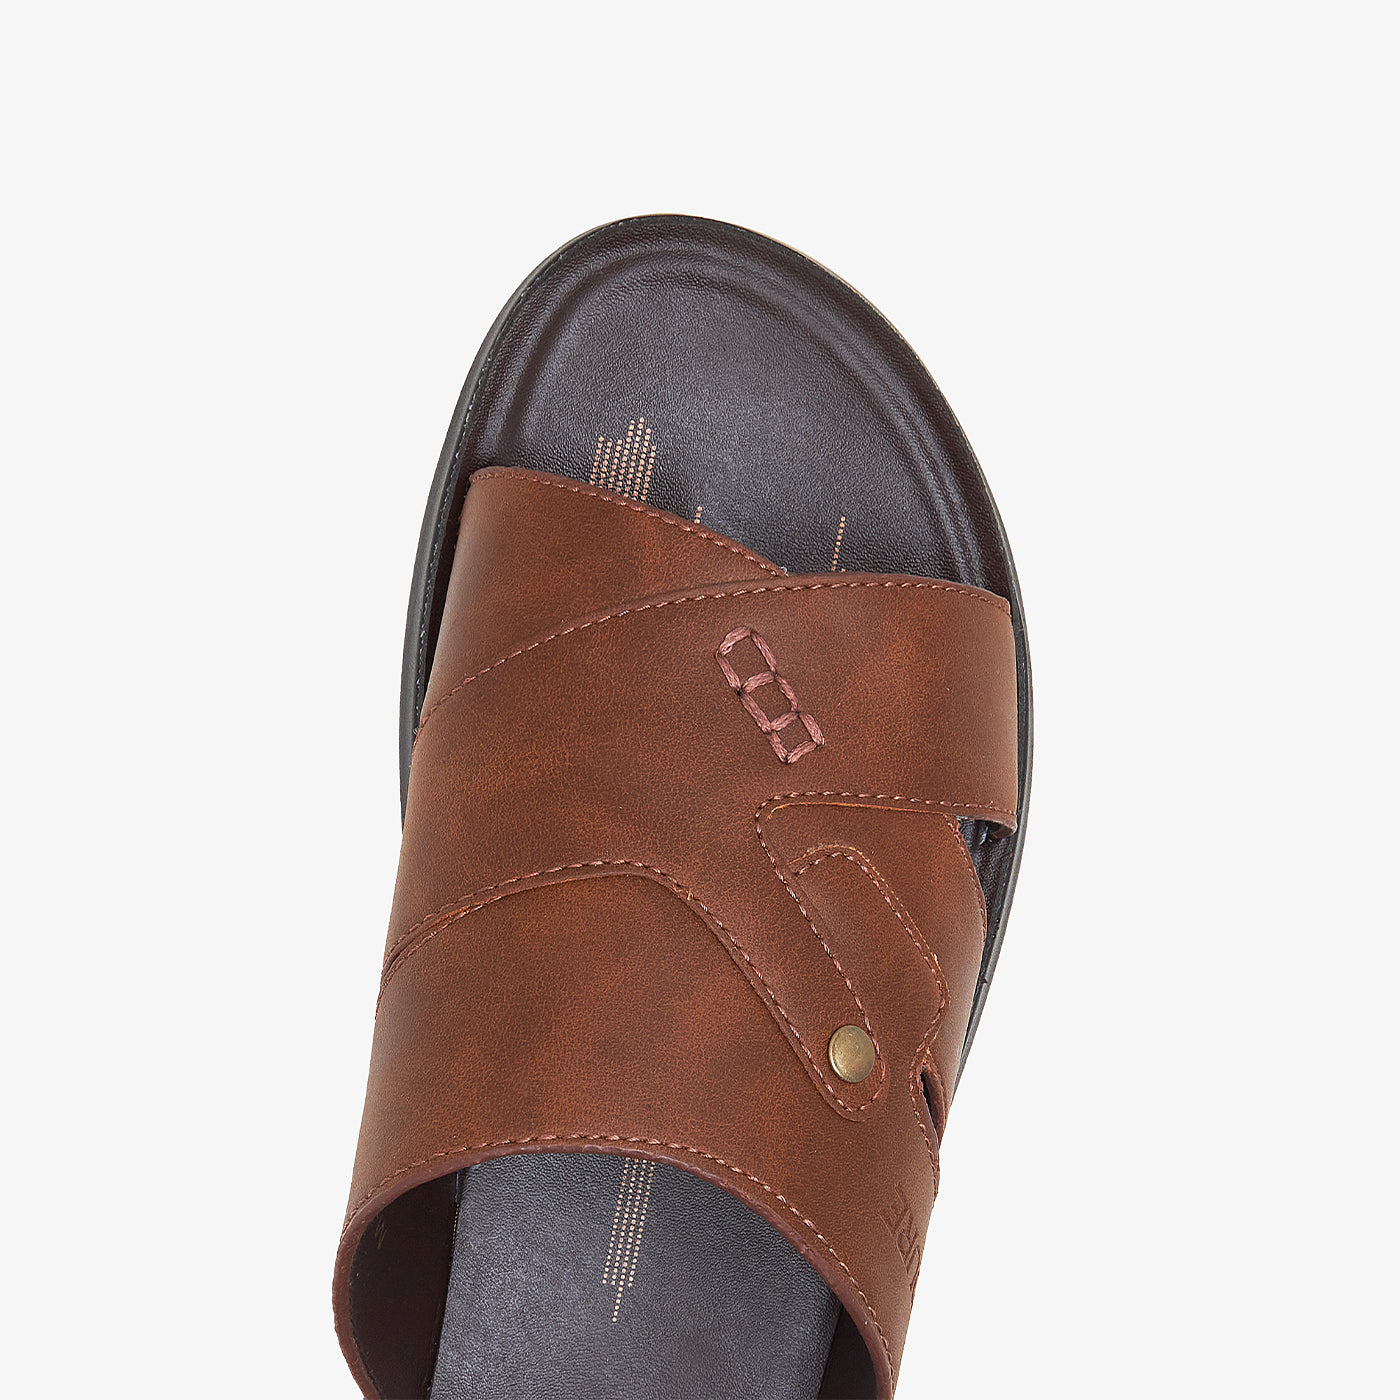 Fashionable Chappals for Men